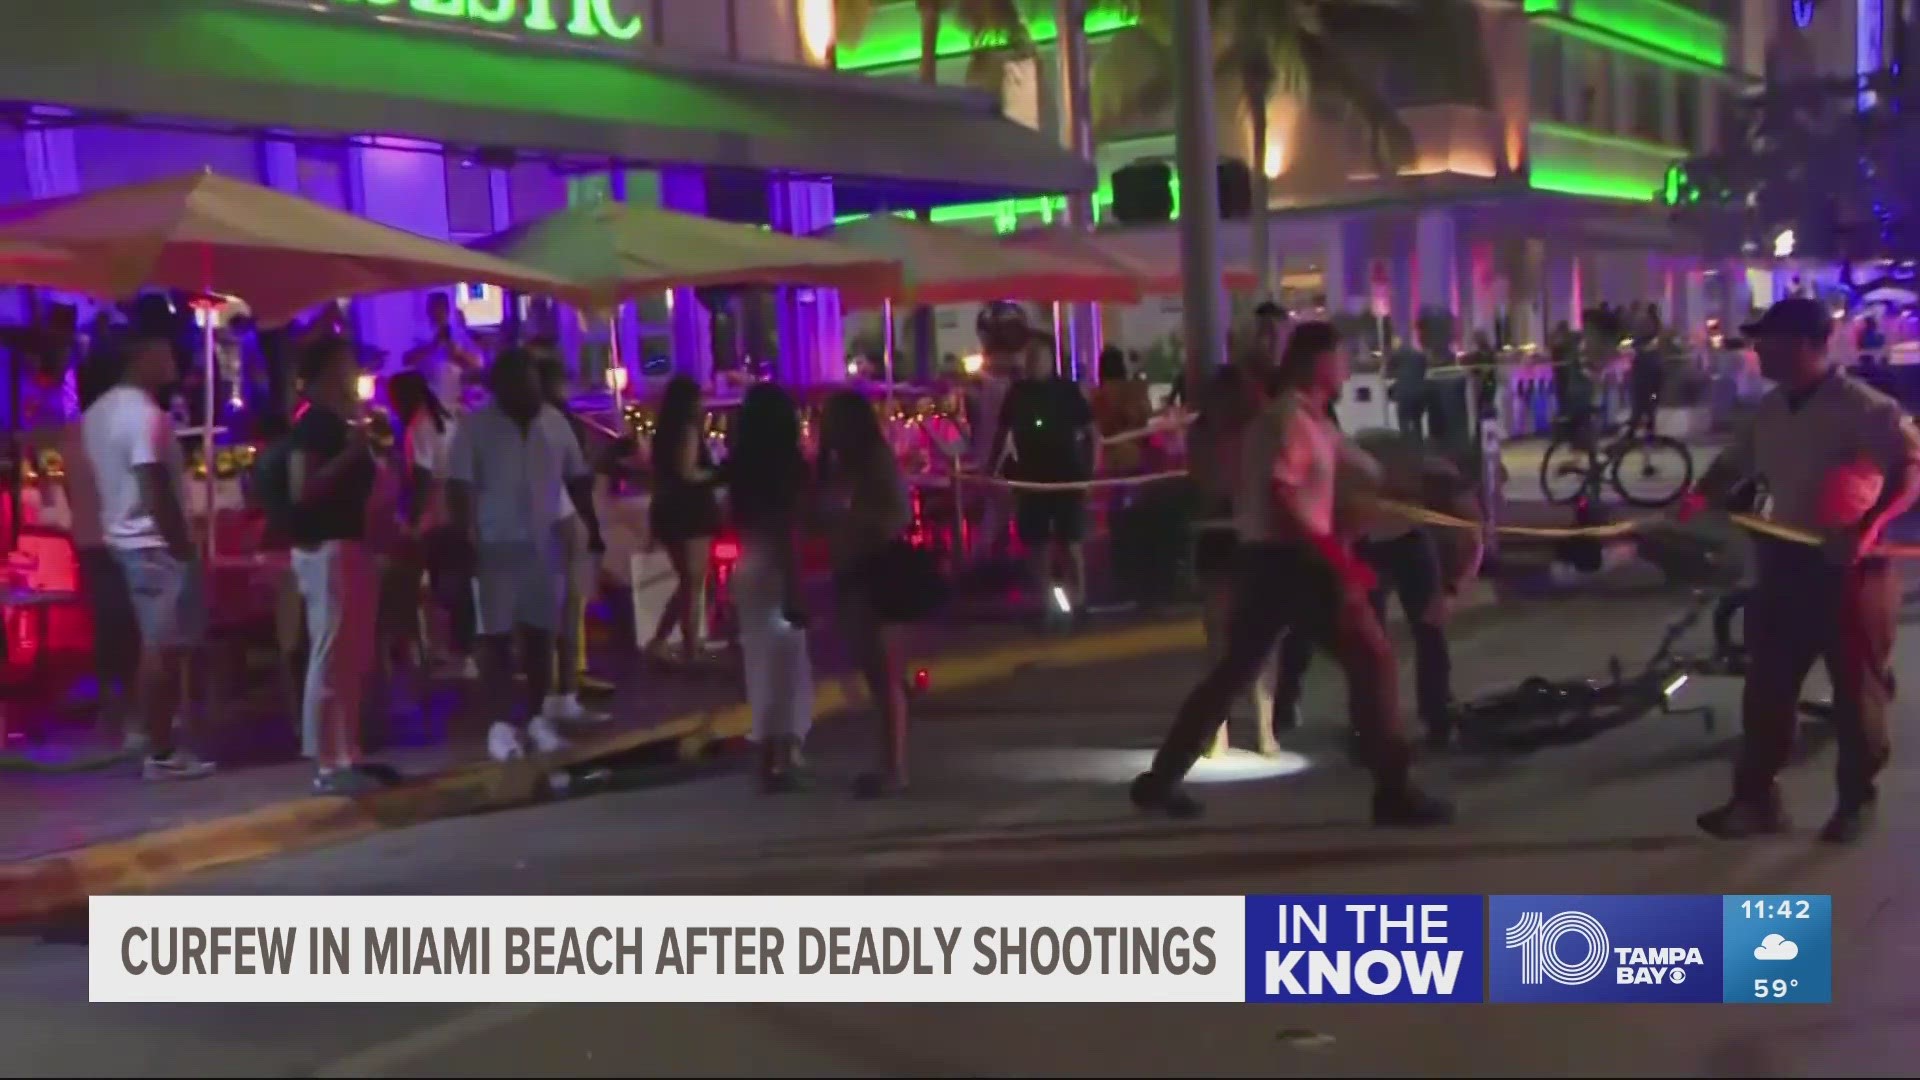 The curfew mainly affects South Beach, the most popular party location for spring breakers.